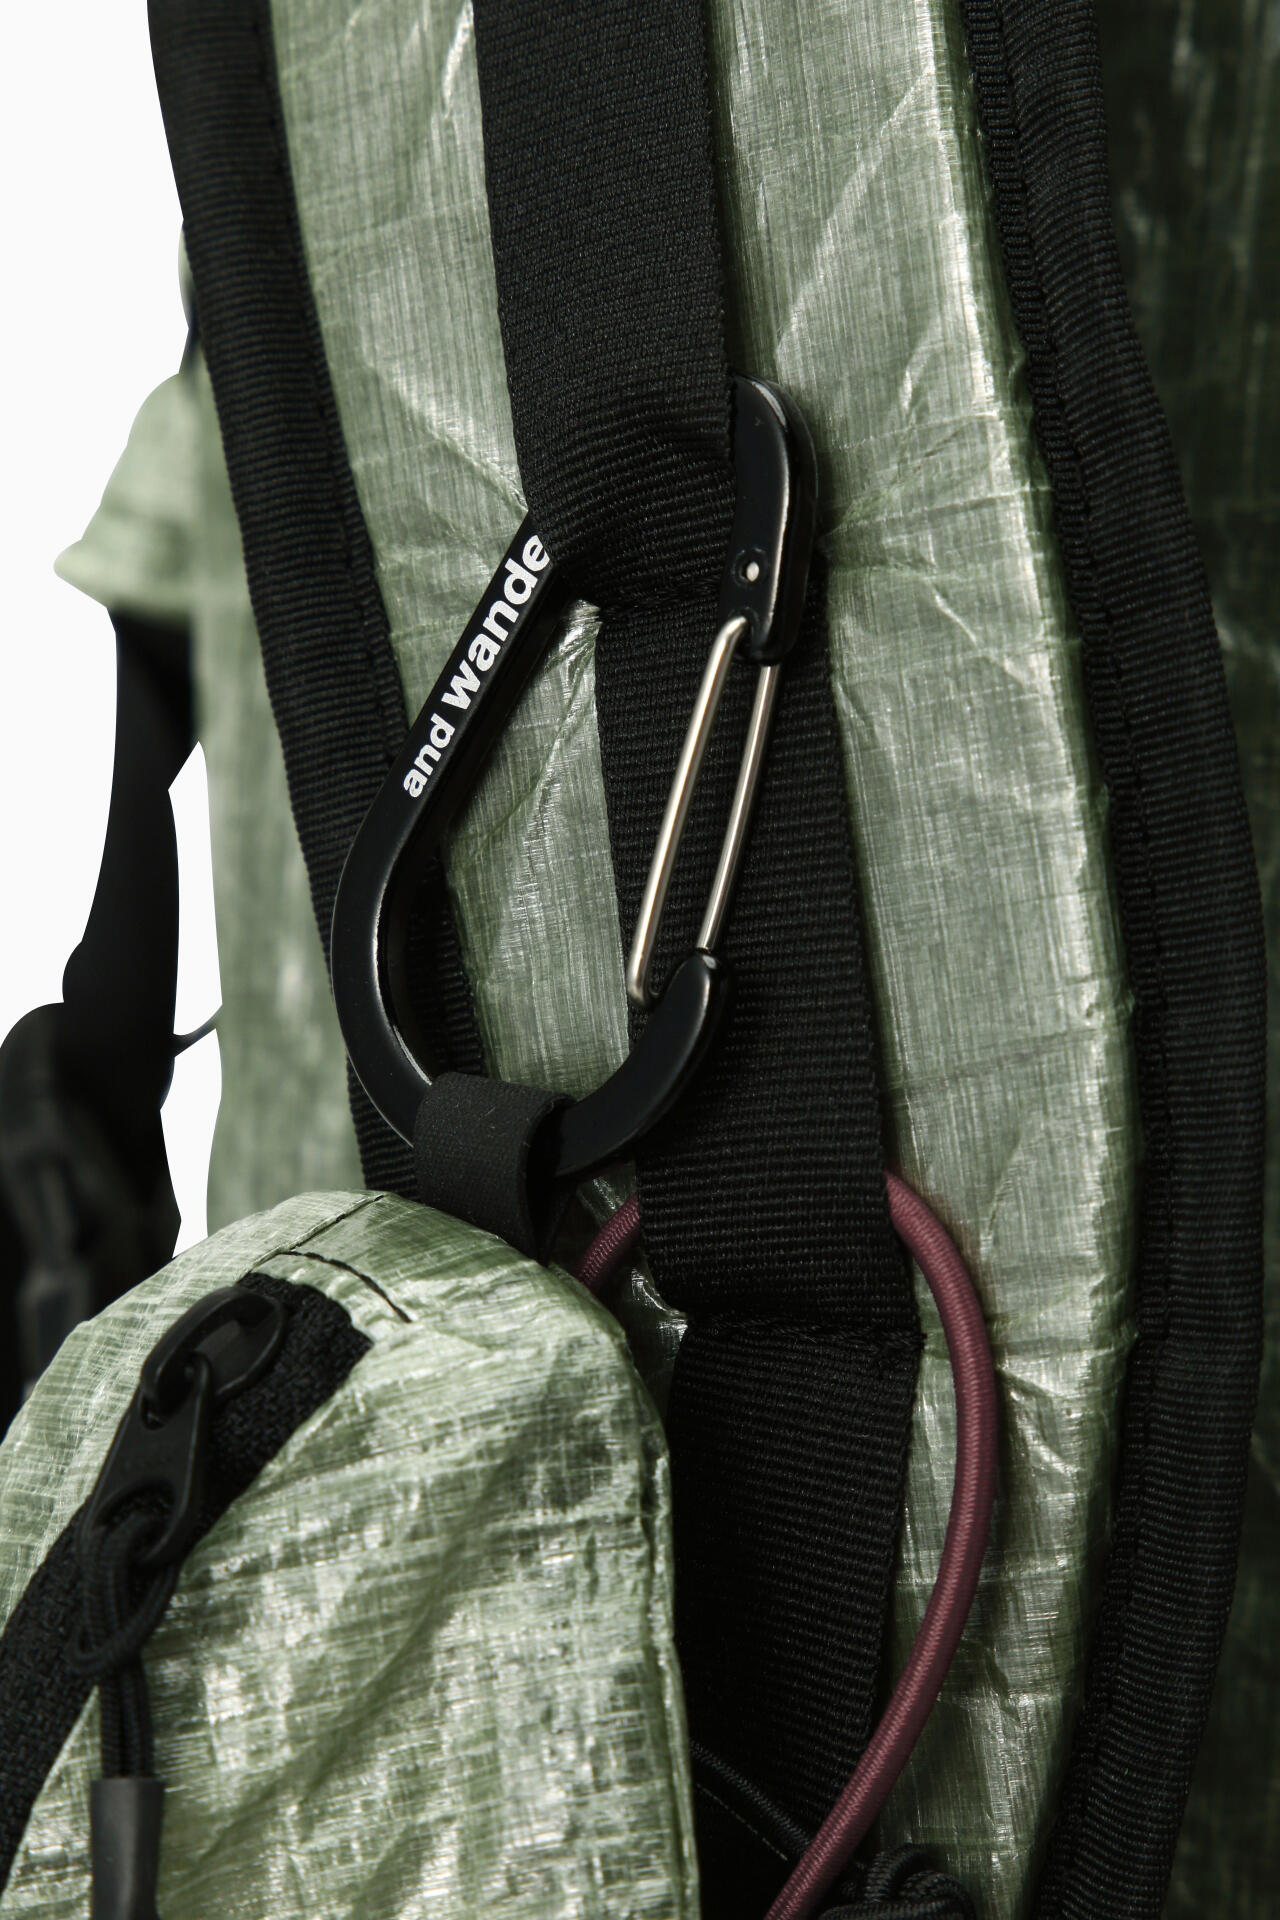 UL backpack with Dyneema(R) | backpack | and wander ONLINE STORE